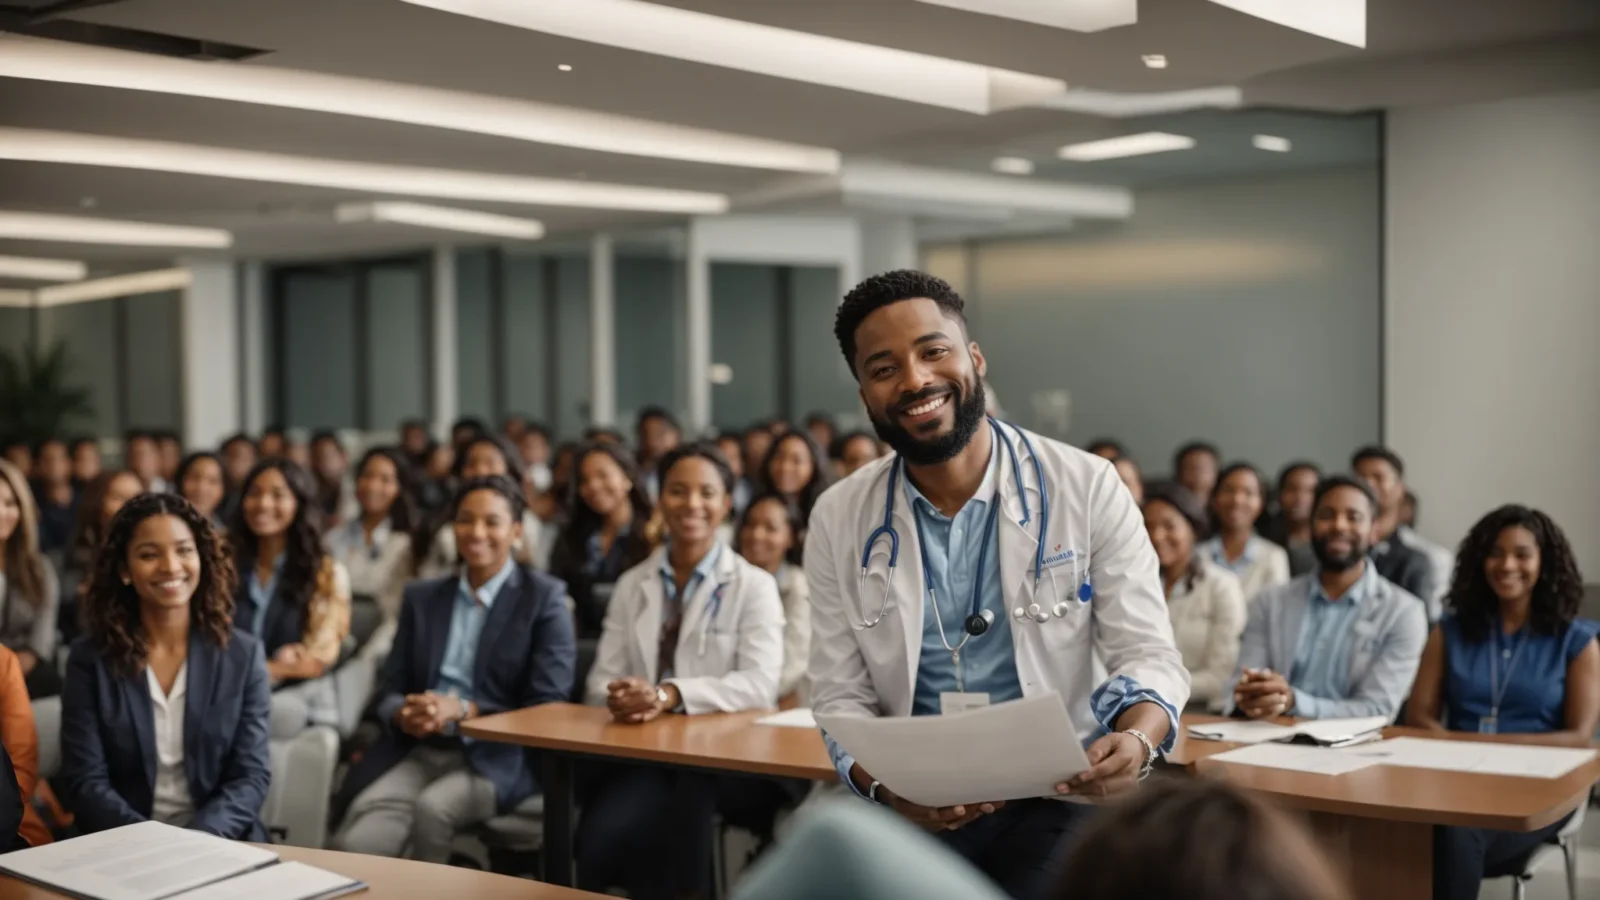 a doctor smiling confidently while presenting a wellness seminar to a diverse audience in a bright, modern conference room.